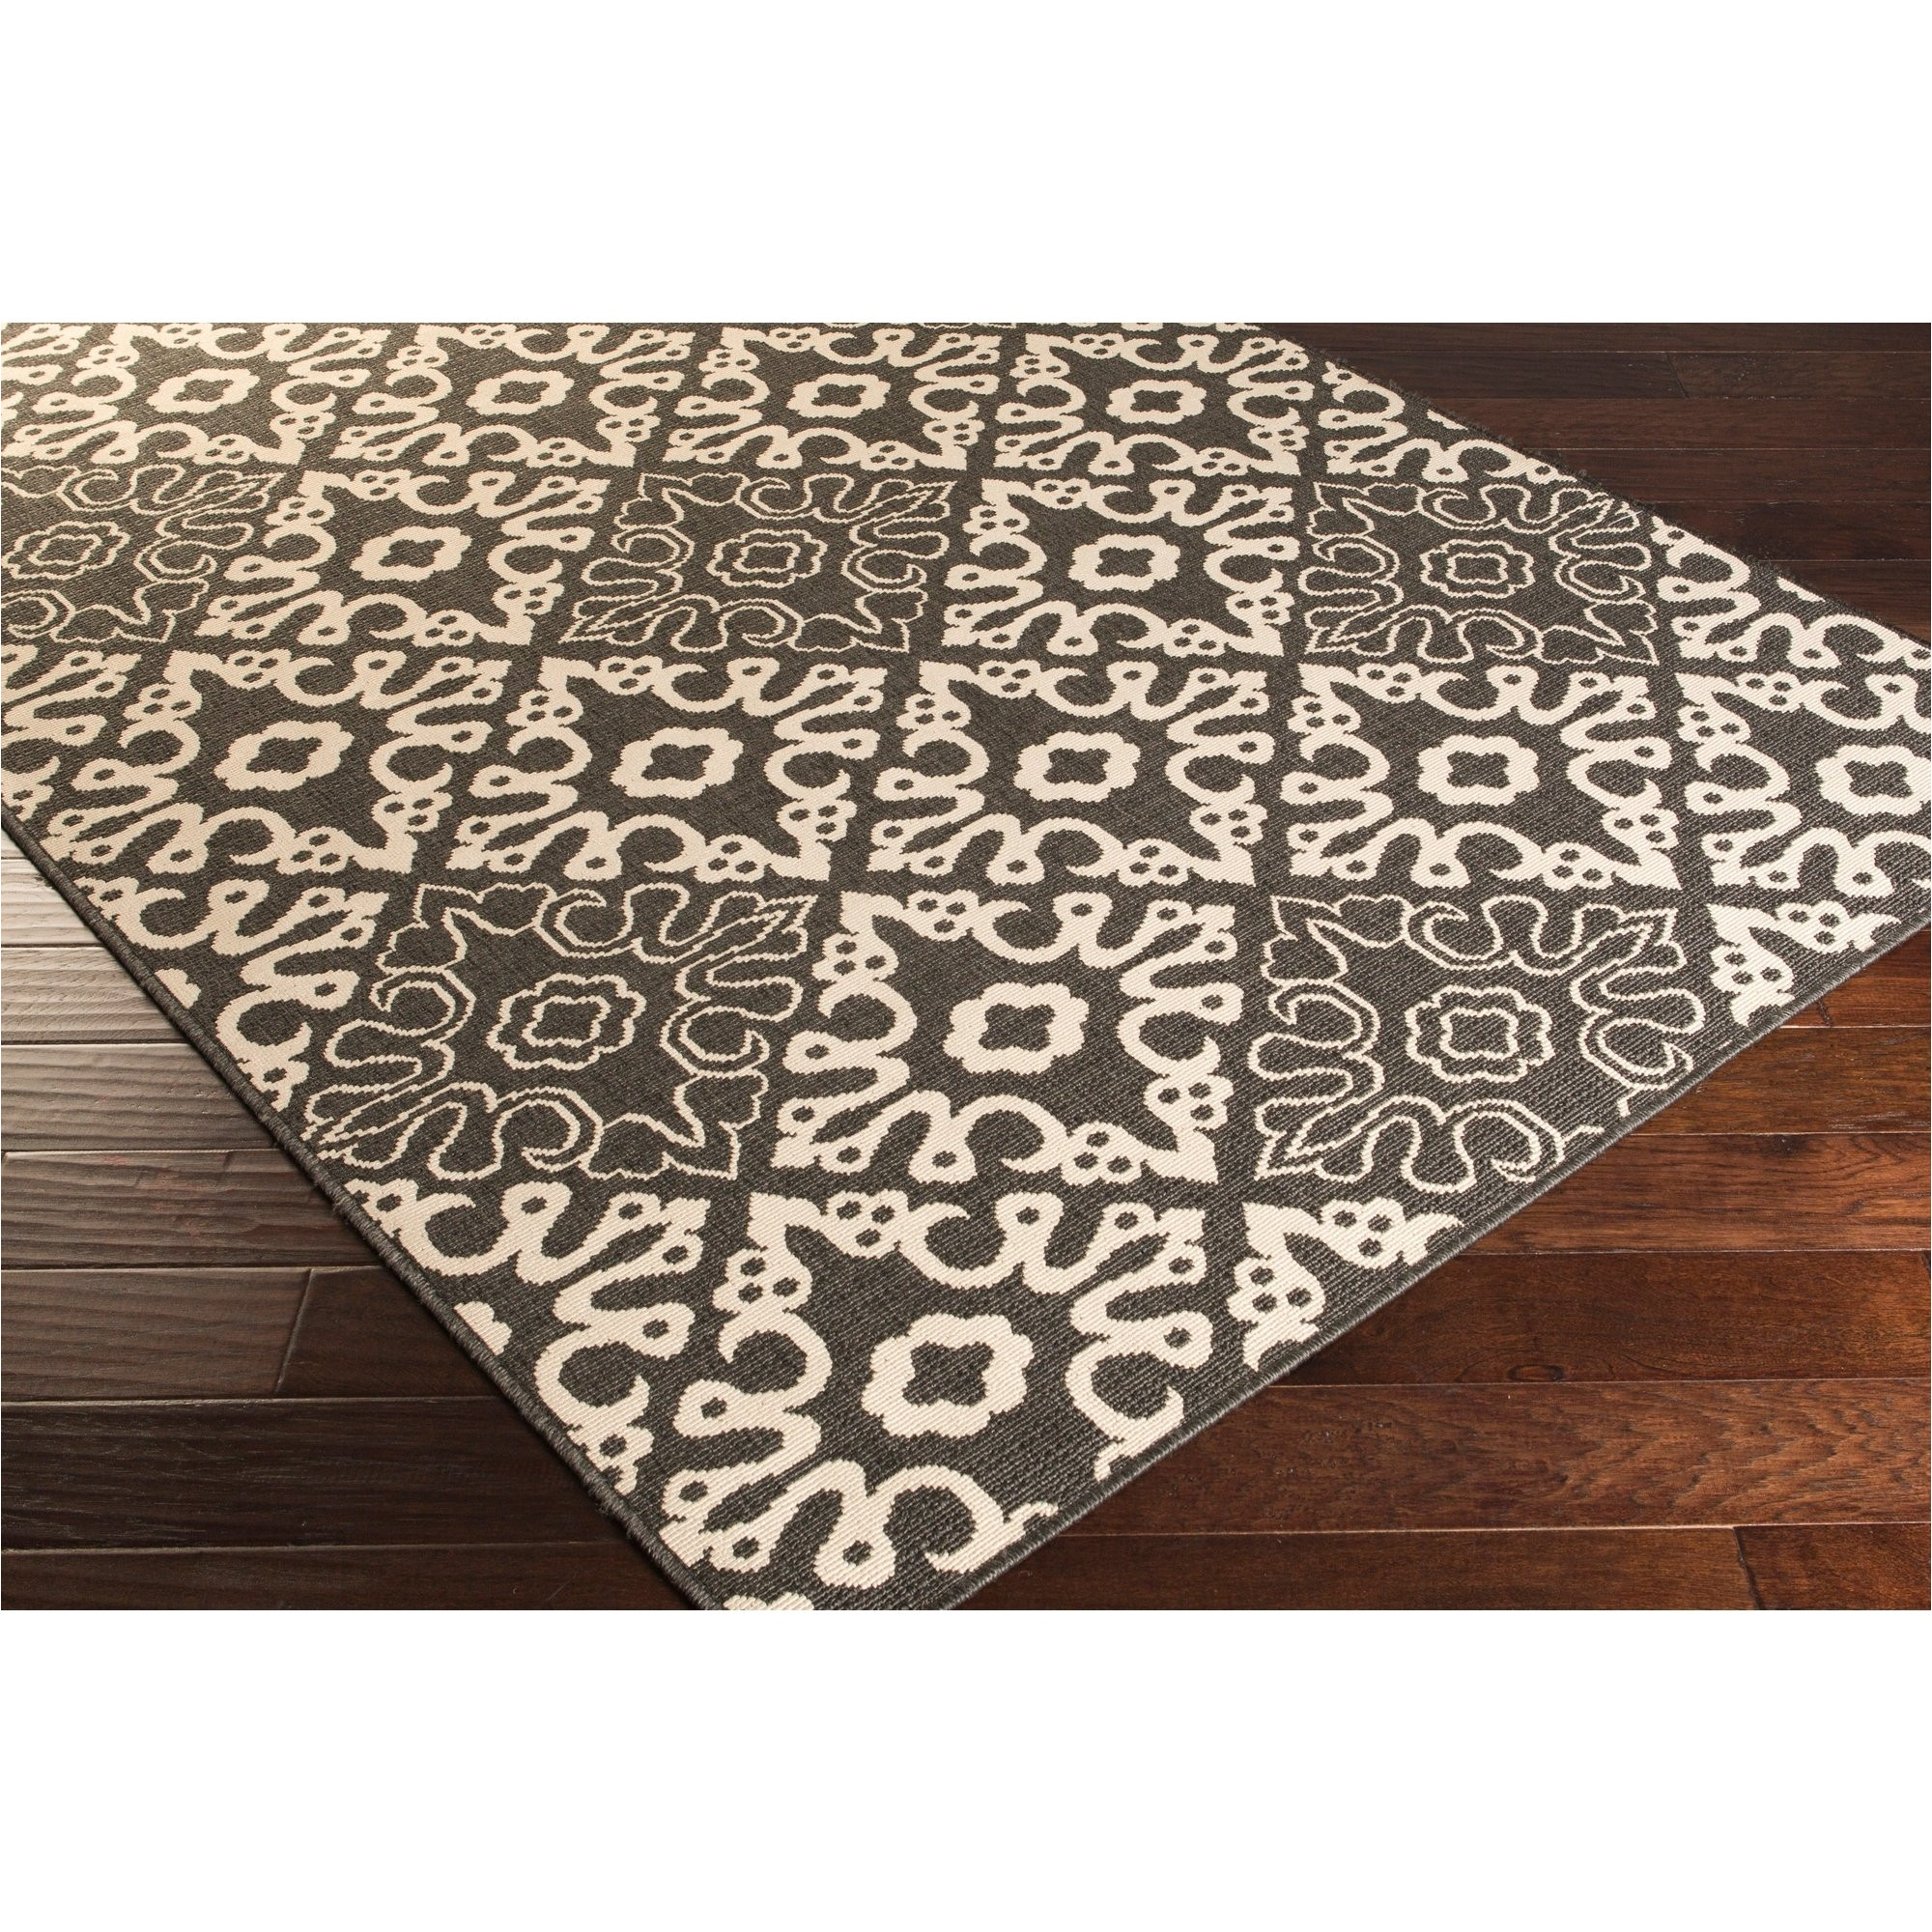 shop olivia contemporary geometric indoor outdoor area rug on sale free shipping today overstock com 9442180